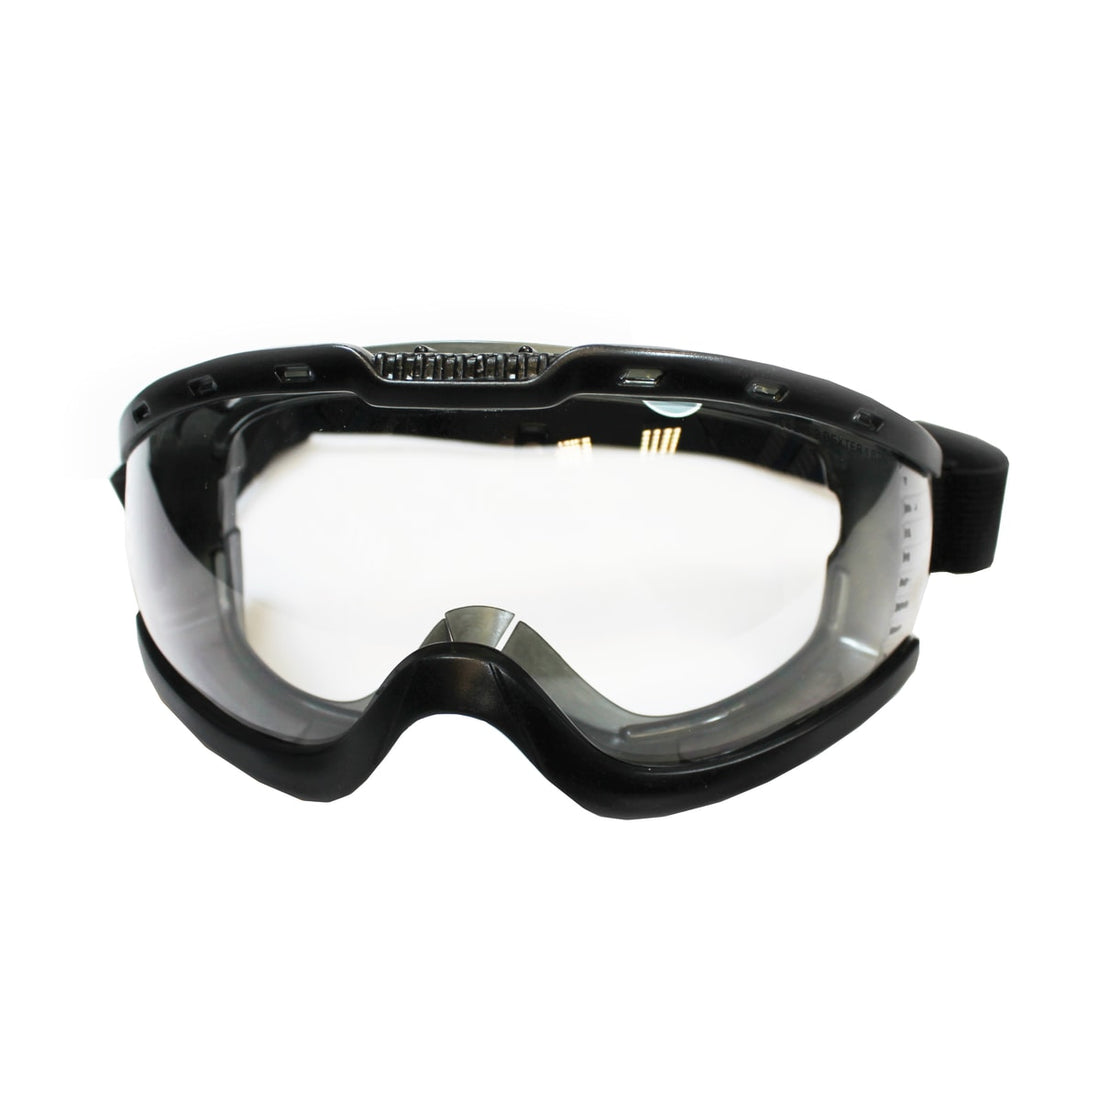 DEXTER ANTI-FOG GOGGLES WITH ELASTIC BAND